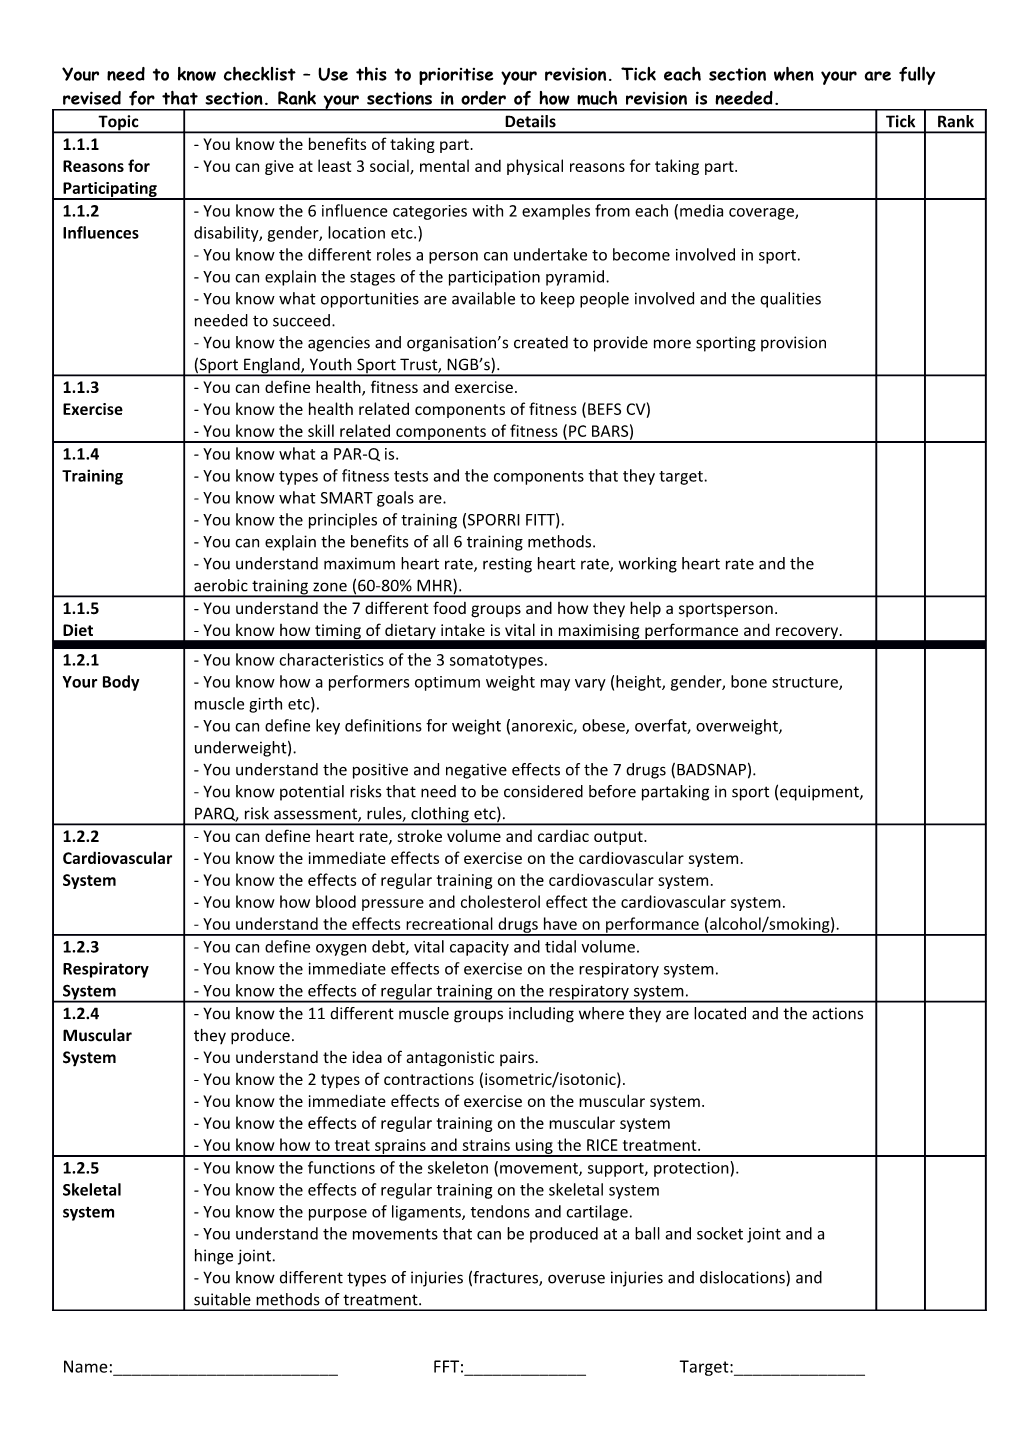 Your Need to Know Checklist Use This to Prioritise Your Revision. Tick Each Section When